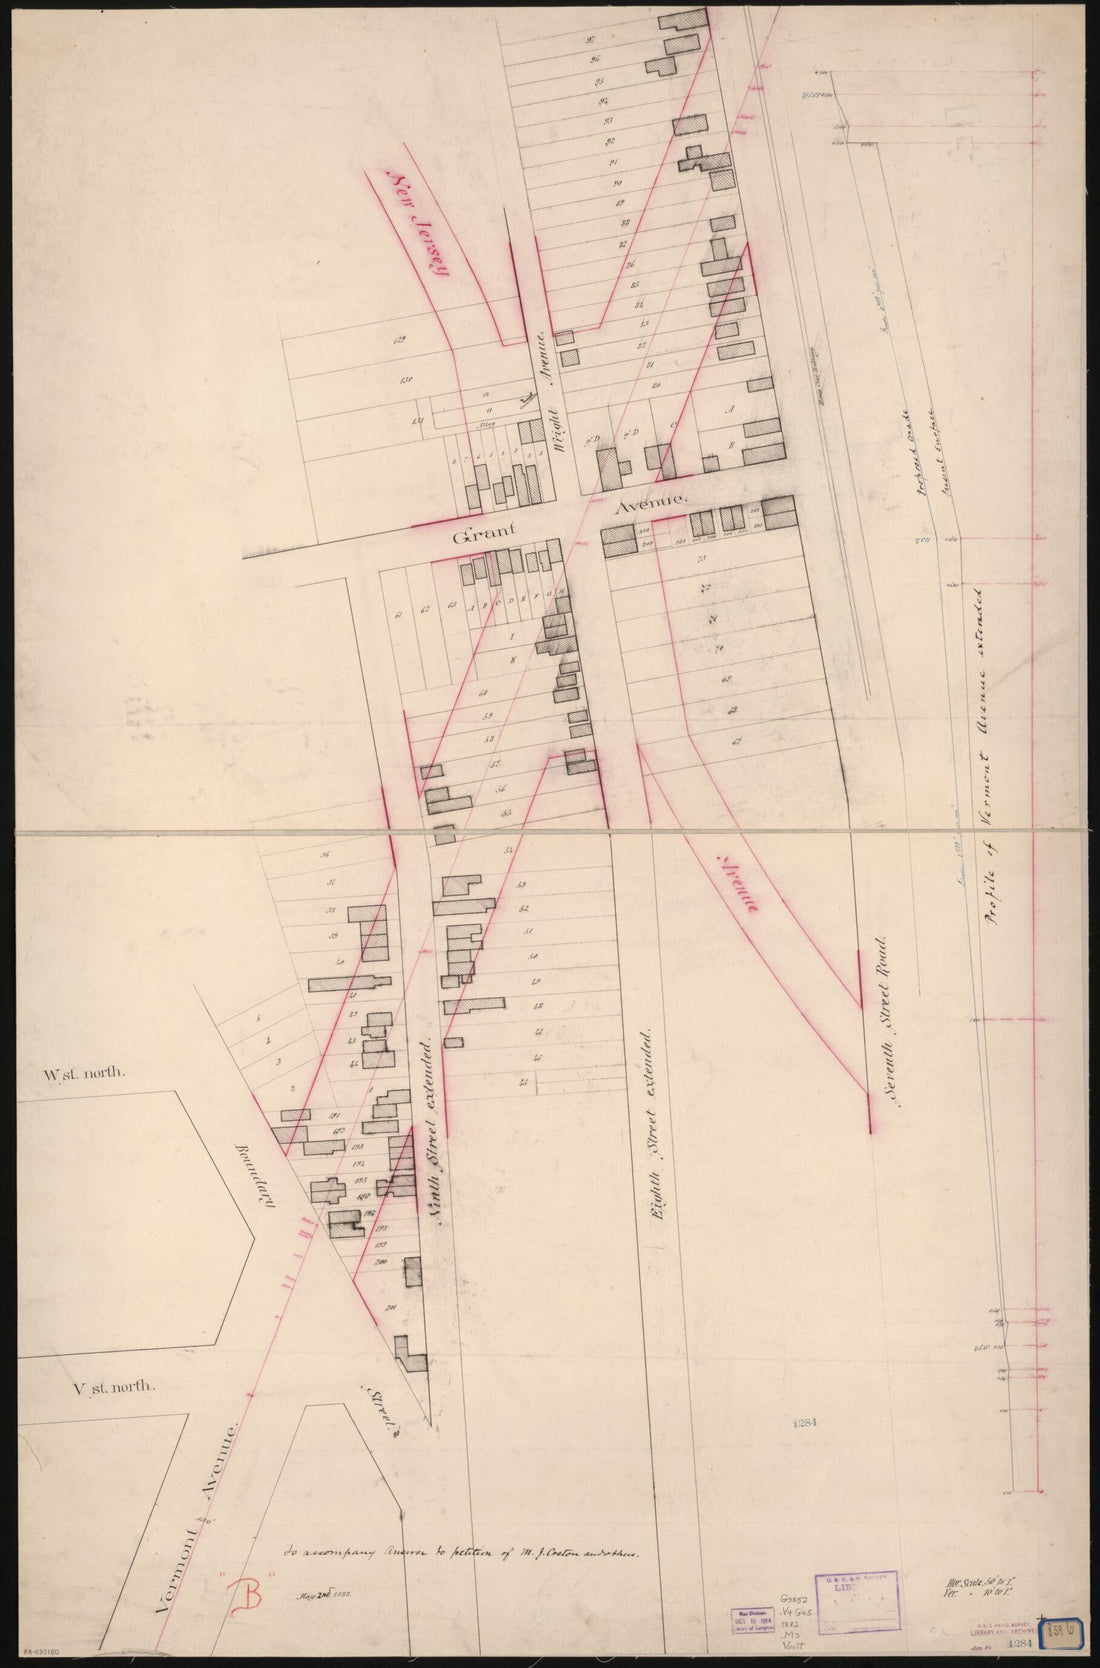 This old map of Map of Proposed Extensions of Vermont and New Jersey Avenues N.W. Between Florida and Georgia Avenues, Washington D.C. from 1882 was created by  in 1882